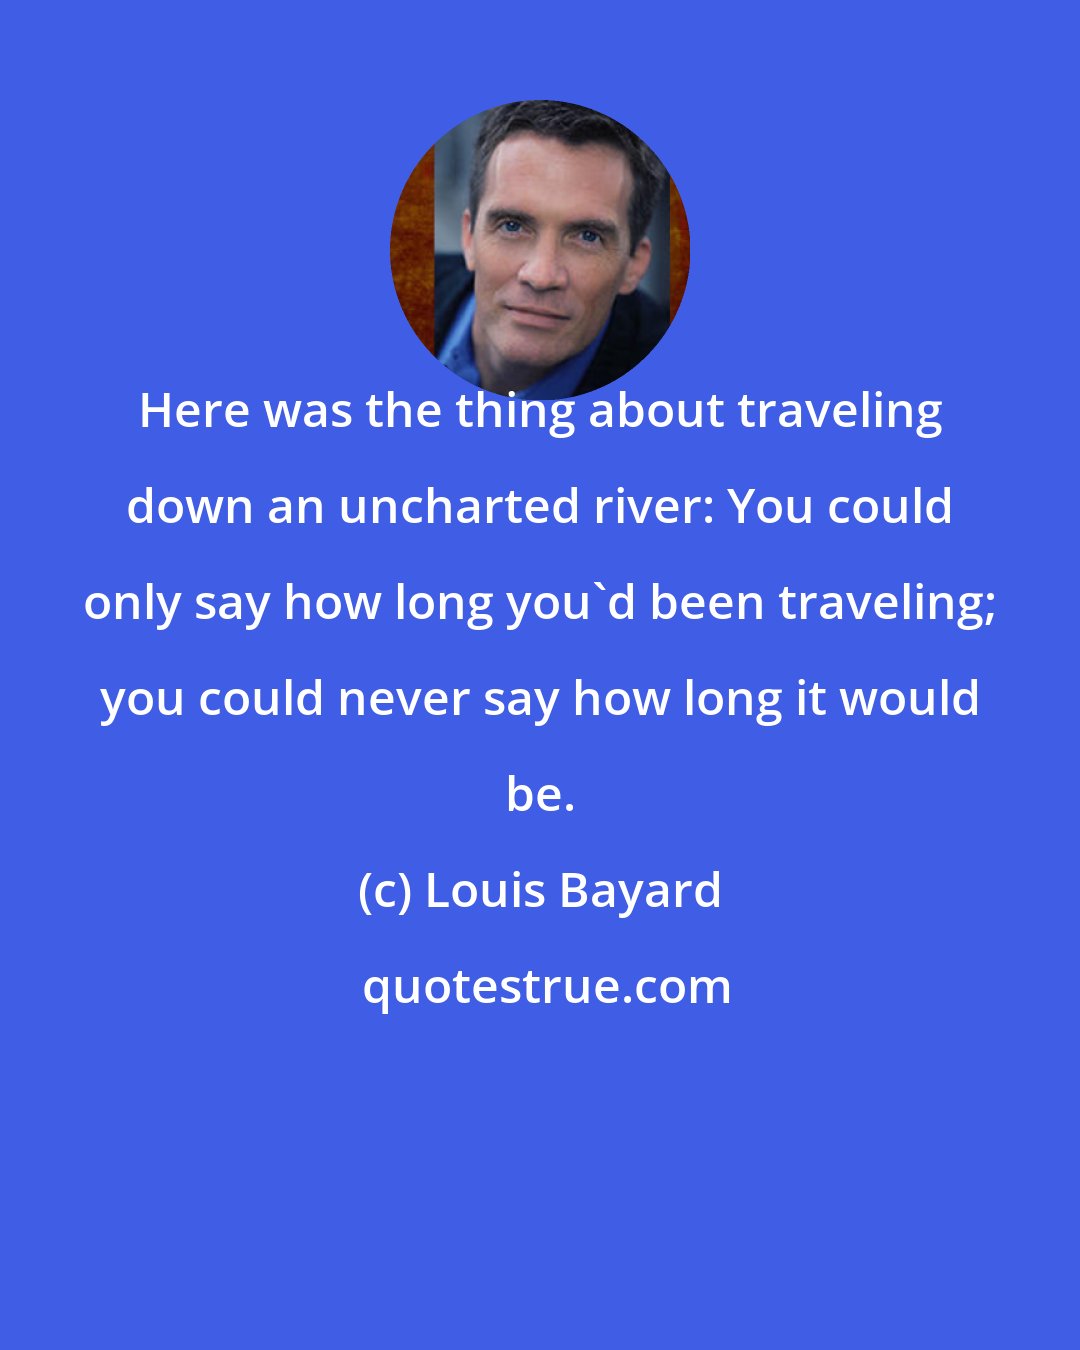 Louis Bayard: Here was the thing about traveling down an uncharted river: You could only say how long you'd been traveling; you could never say how long it would be.